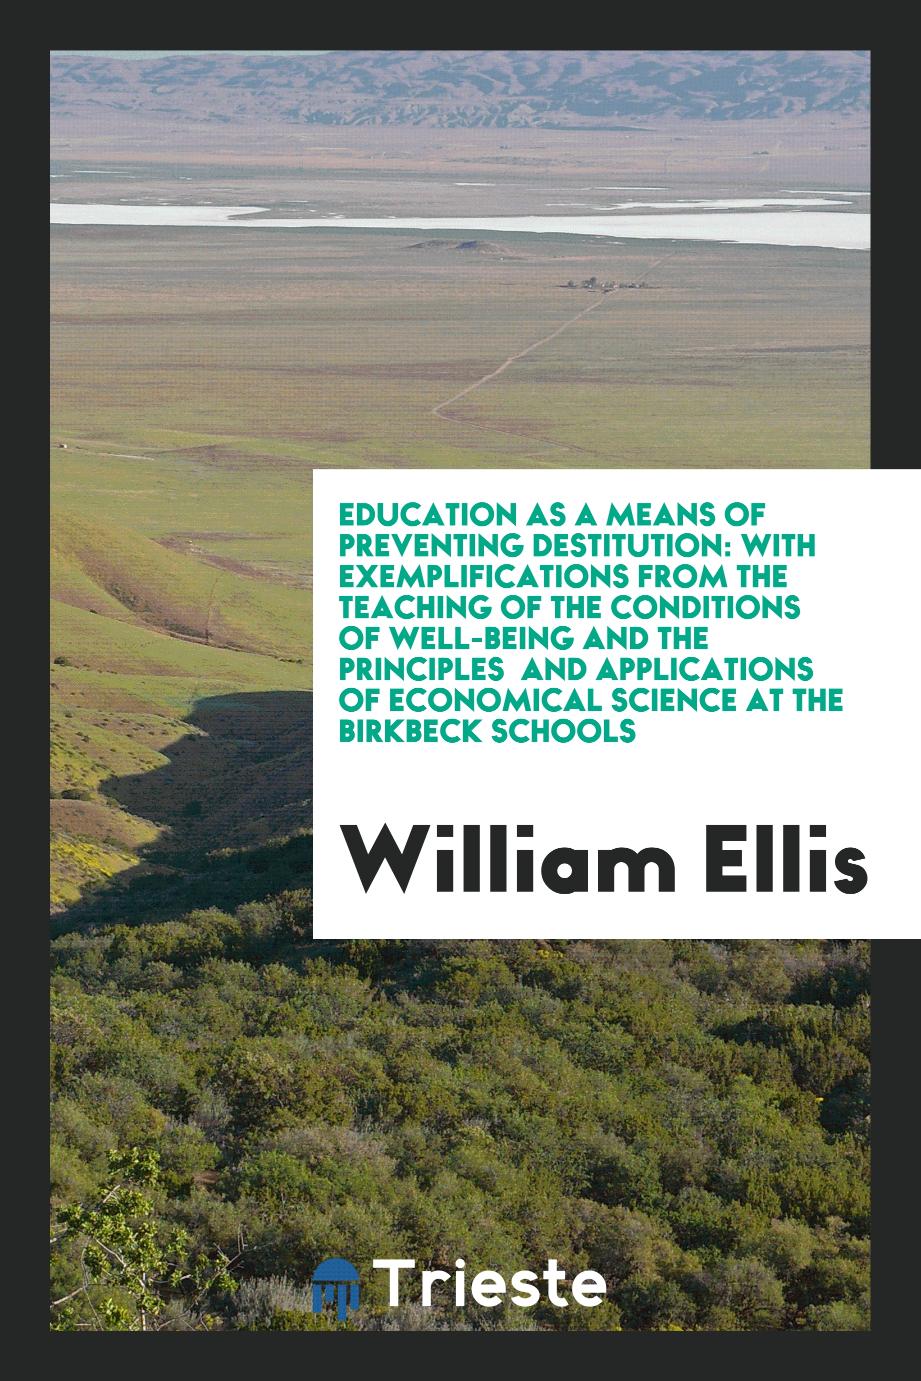 William Ellis - Education as a Means of Preventing Destitution: With Exemplifications from the Teaching of the Conditions of Well-Being and the Principles and Applications of Economical Science at the Birkbeck Schools